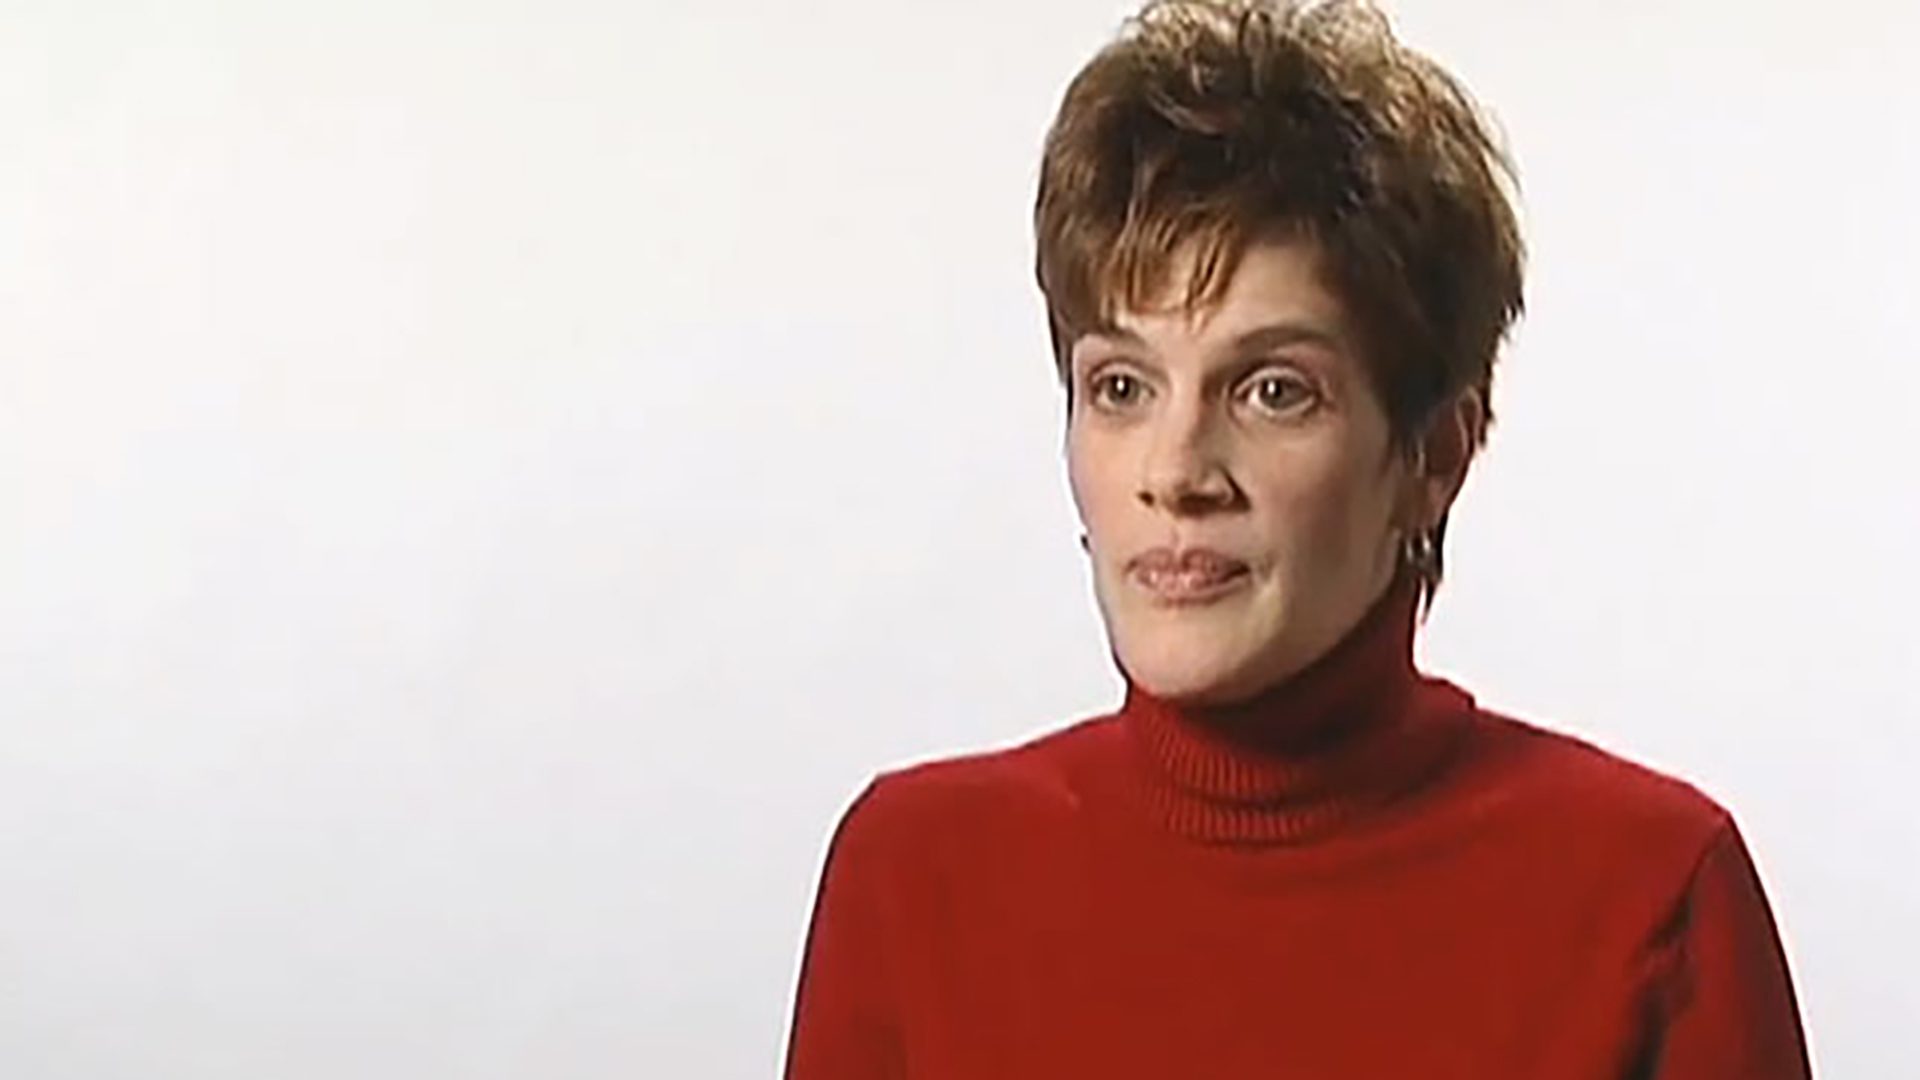 A woman with short hair wearing a red turtleneck is interviewed against a white background